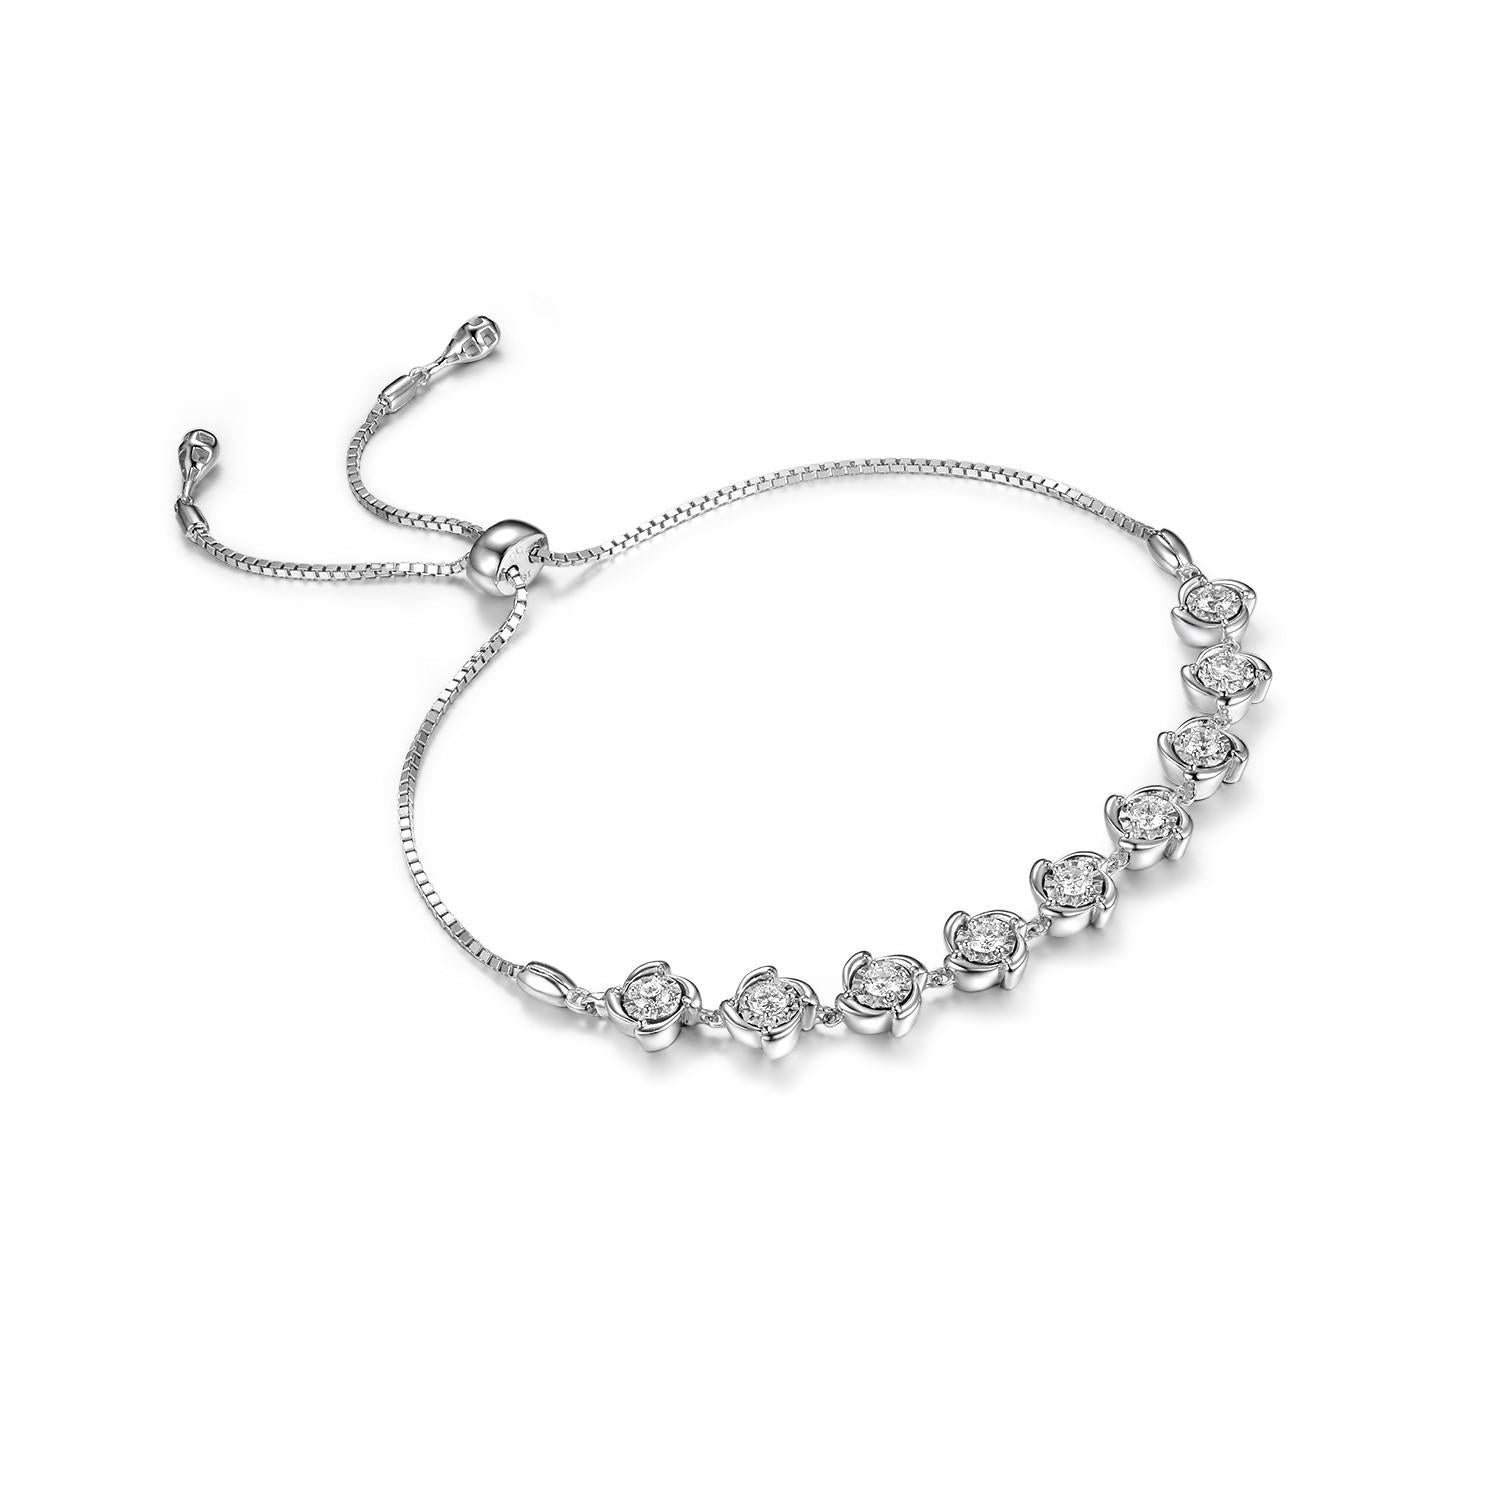 This bracelet feature stations of diamond in 18 karat white gold. 0.46 carat of the round diamond. At the end of the bracelet there's an extension hoop. 

Length 8.5 inch
18 Karat White Gold 
Diamond 0.46 carat